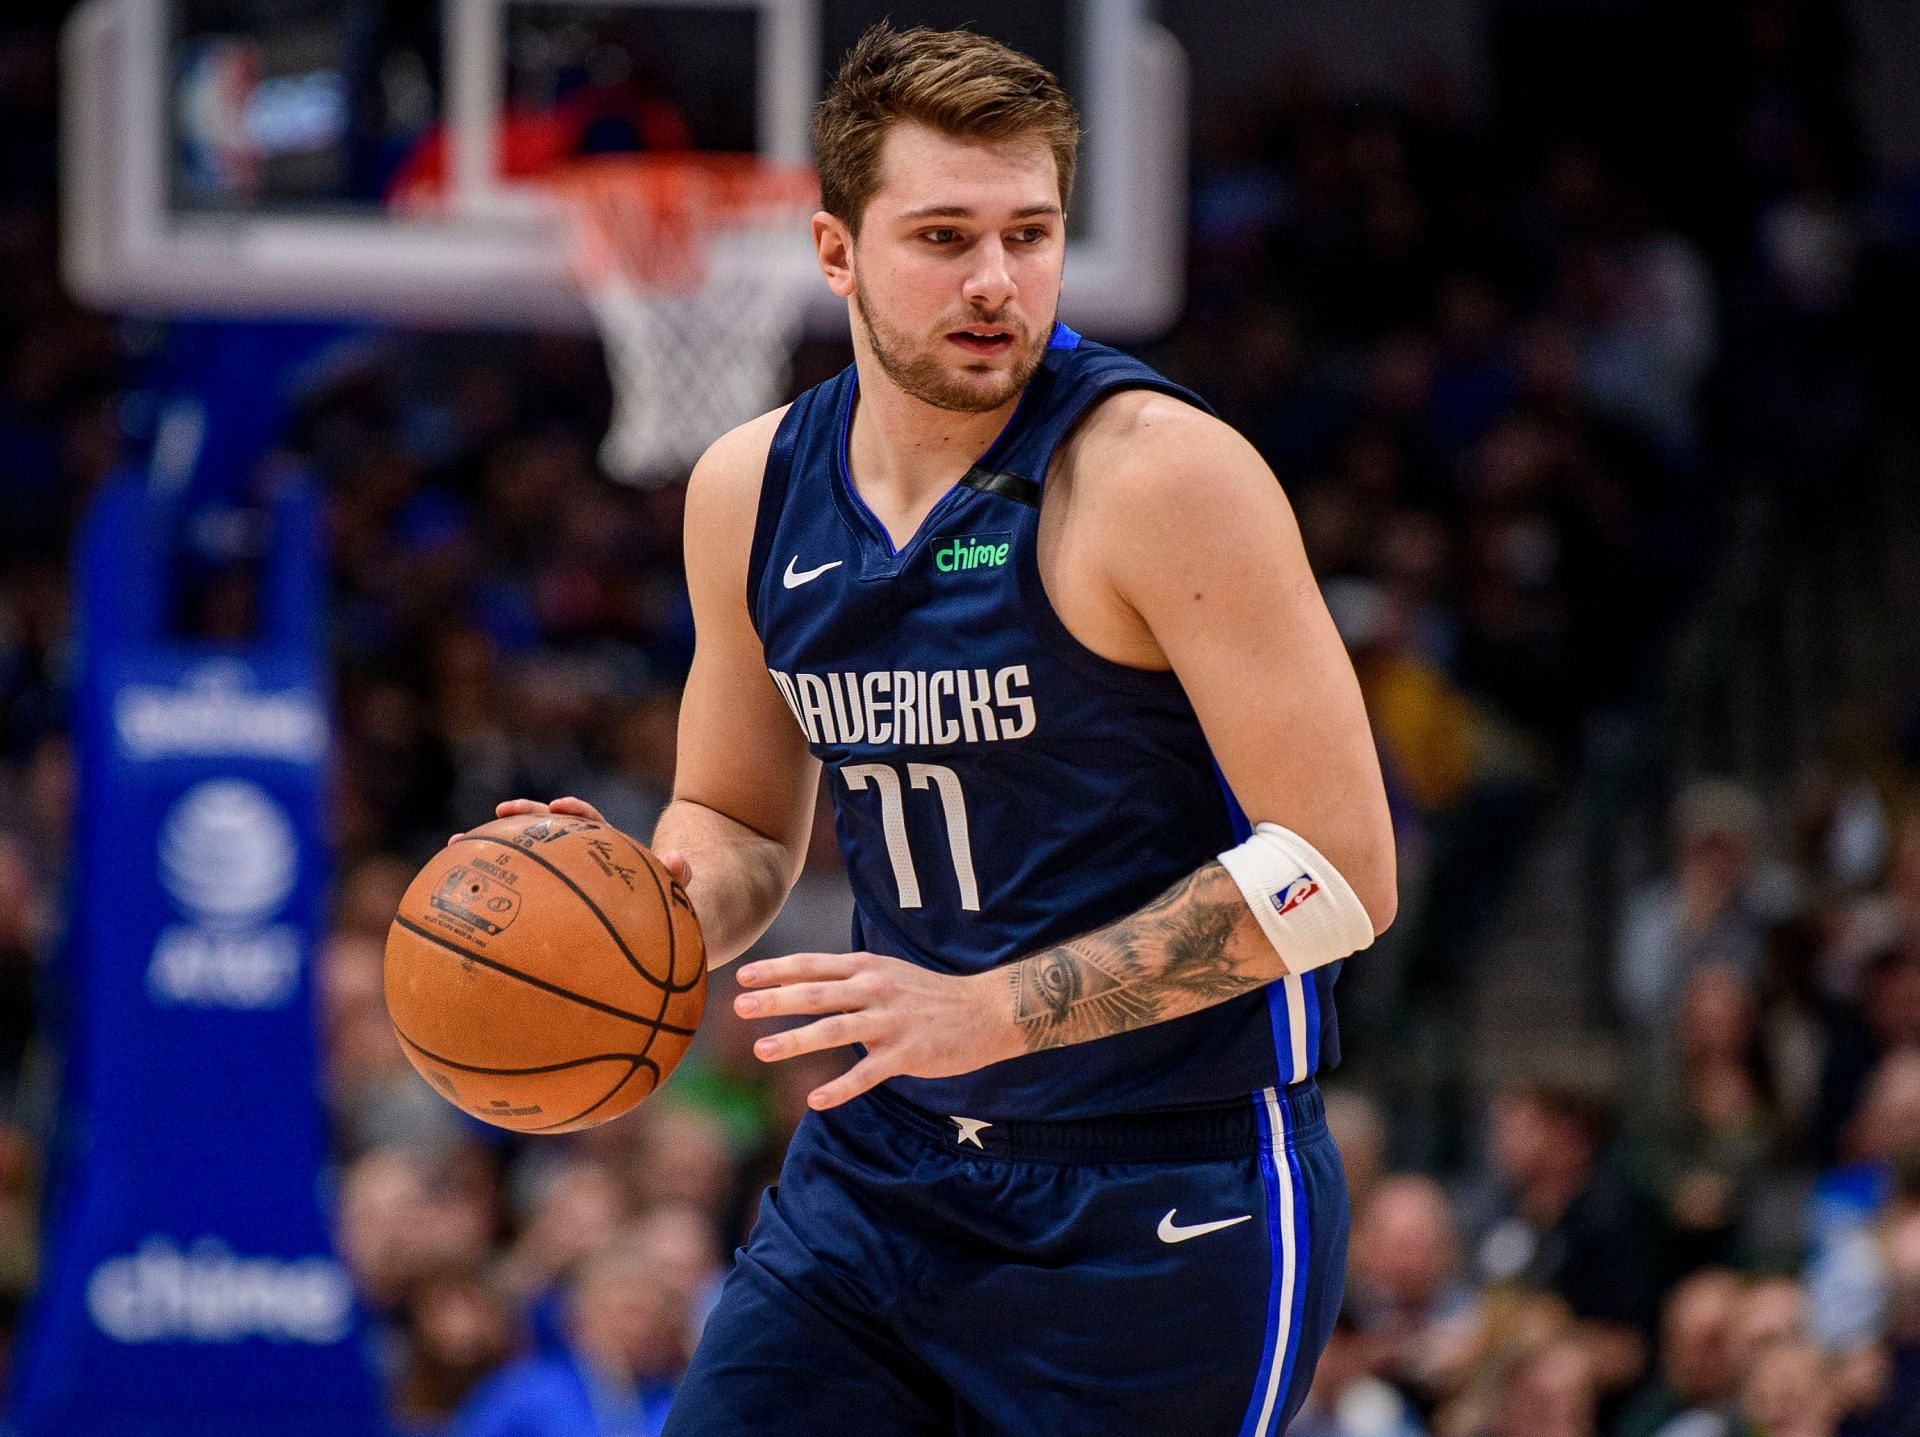 Hall-of-Famer Charles Barkley is putting no cap to what Luka Doncic can achieve in his NBA career. [Photo: USA Today]